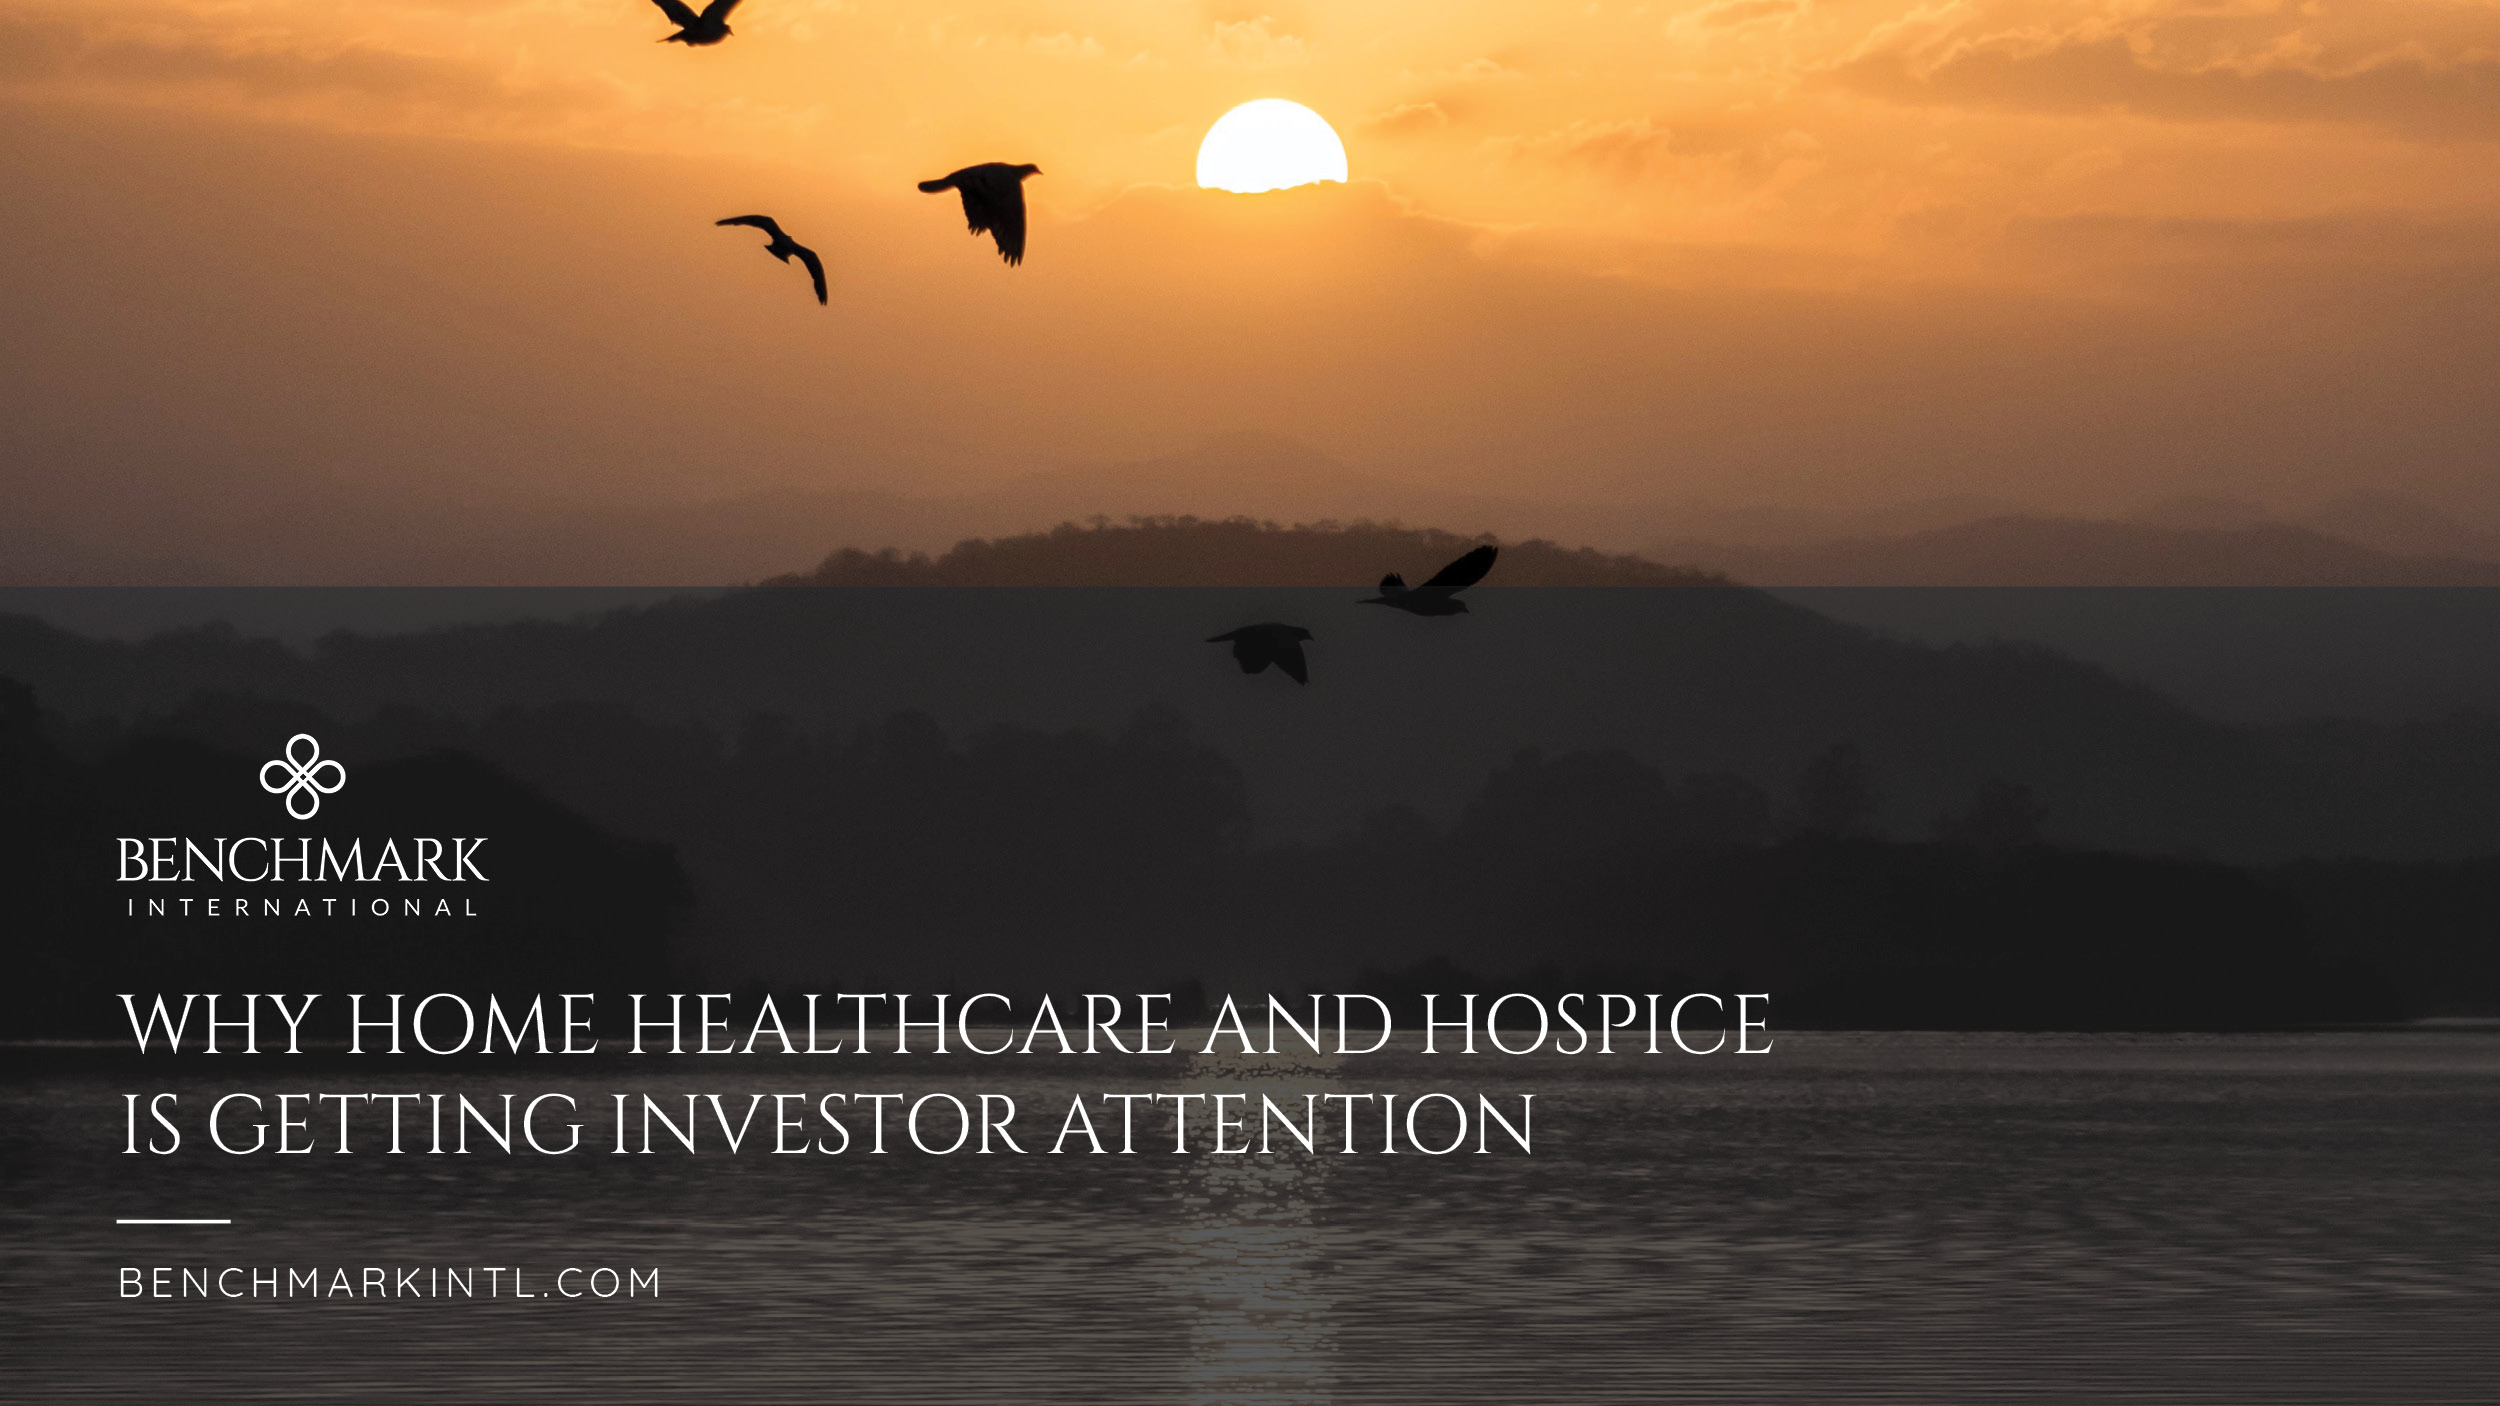 Why Home Healthcare and Hospice is Getting Investor Attention